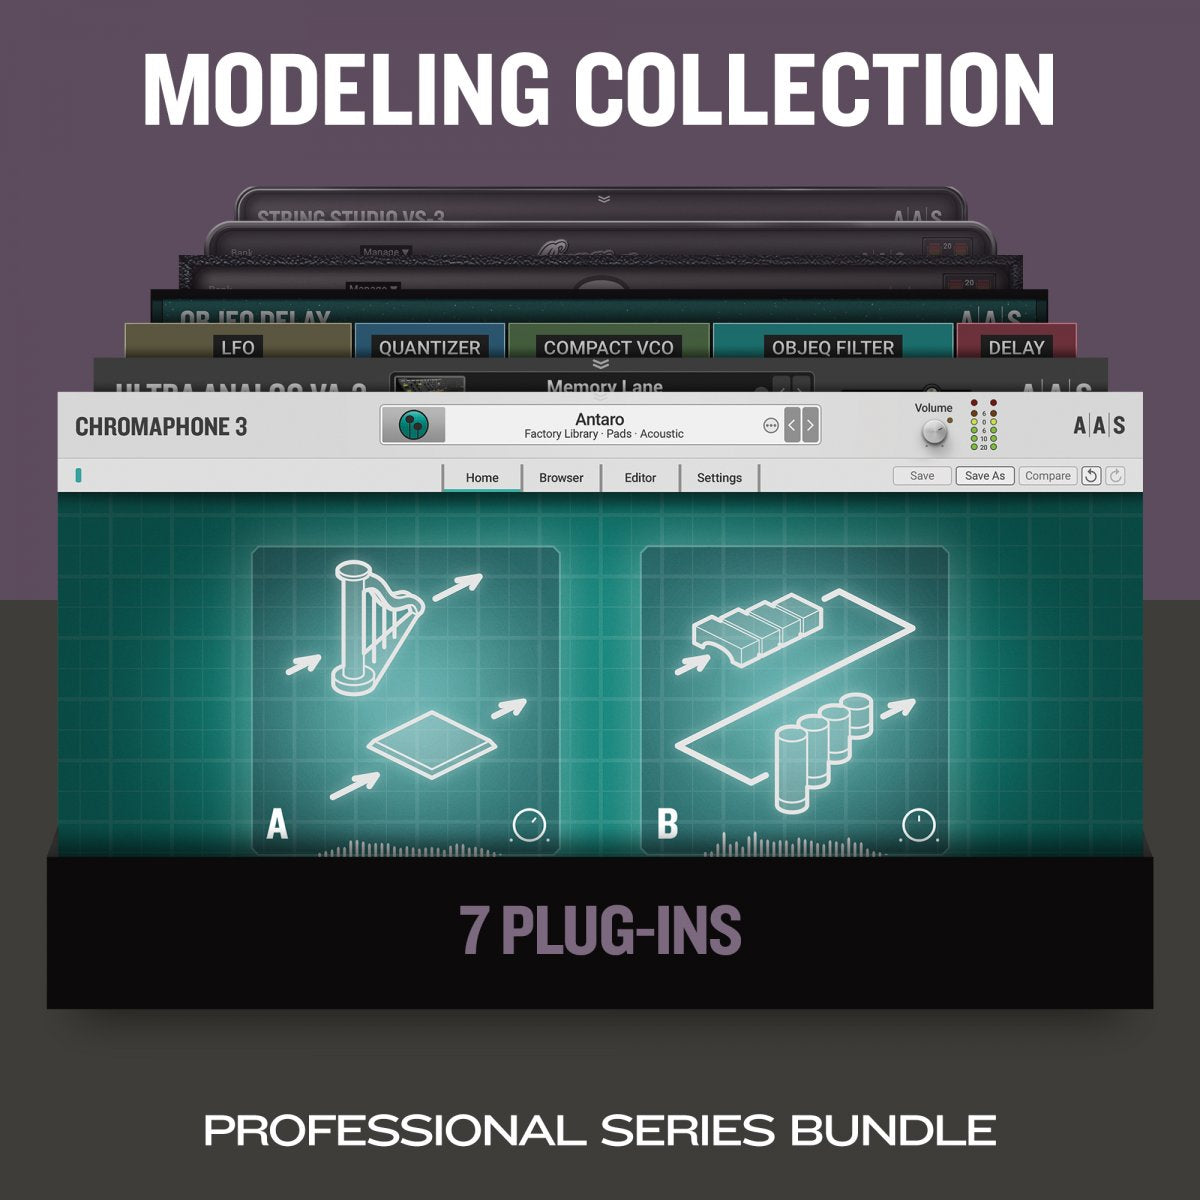 Applied Acoustics Systems Modeling Collection